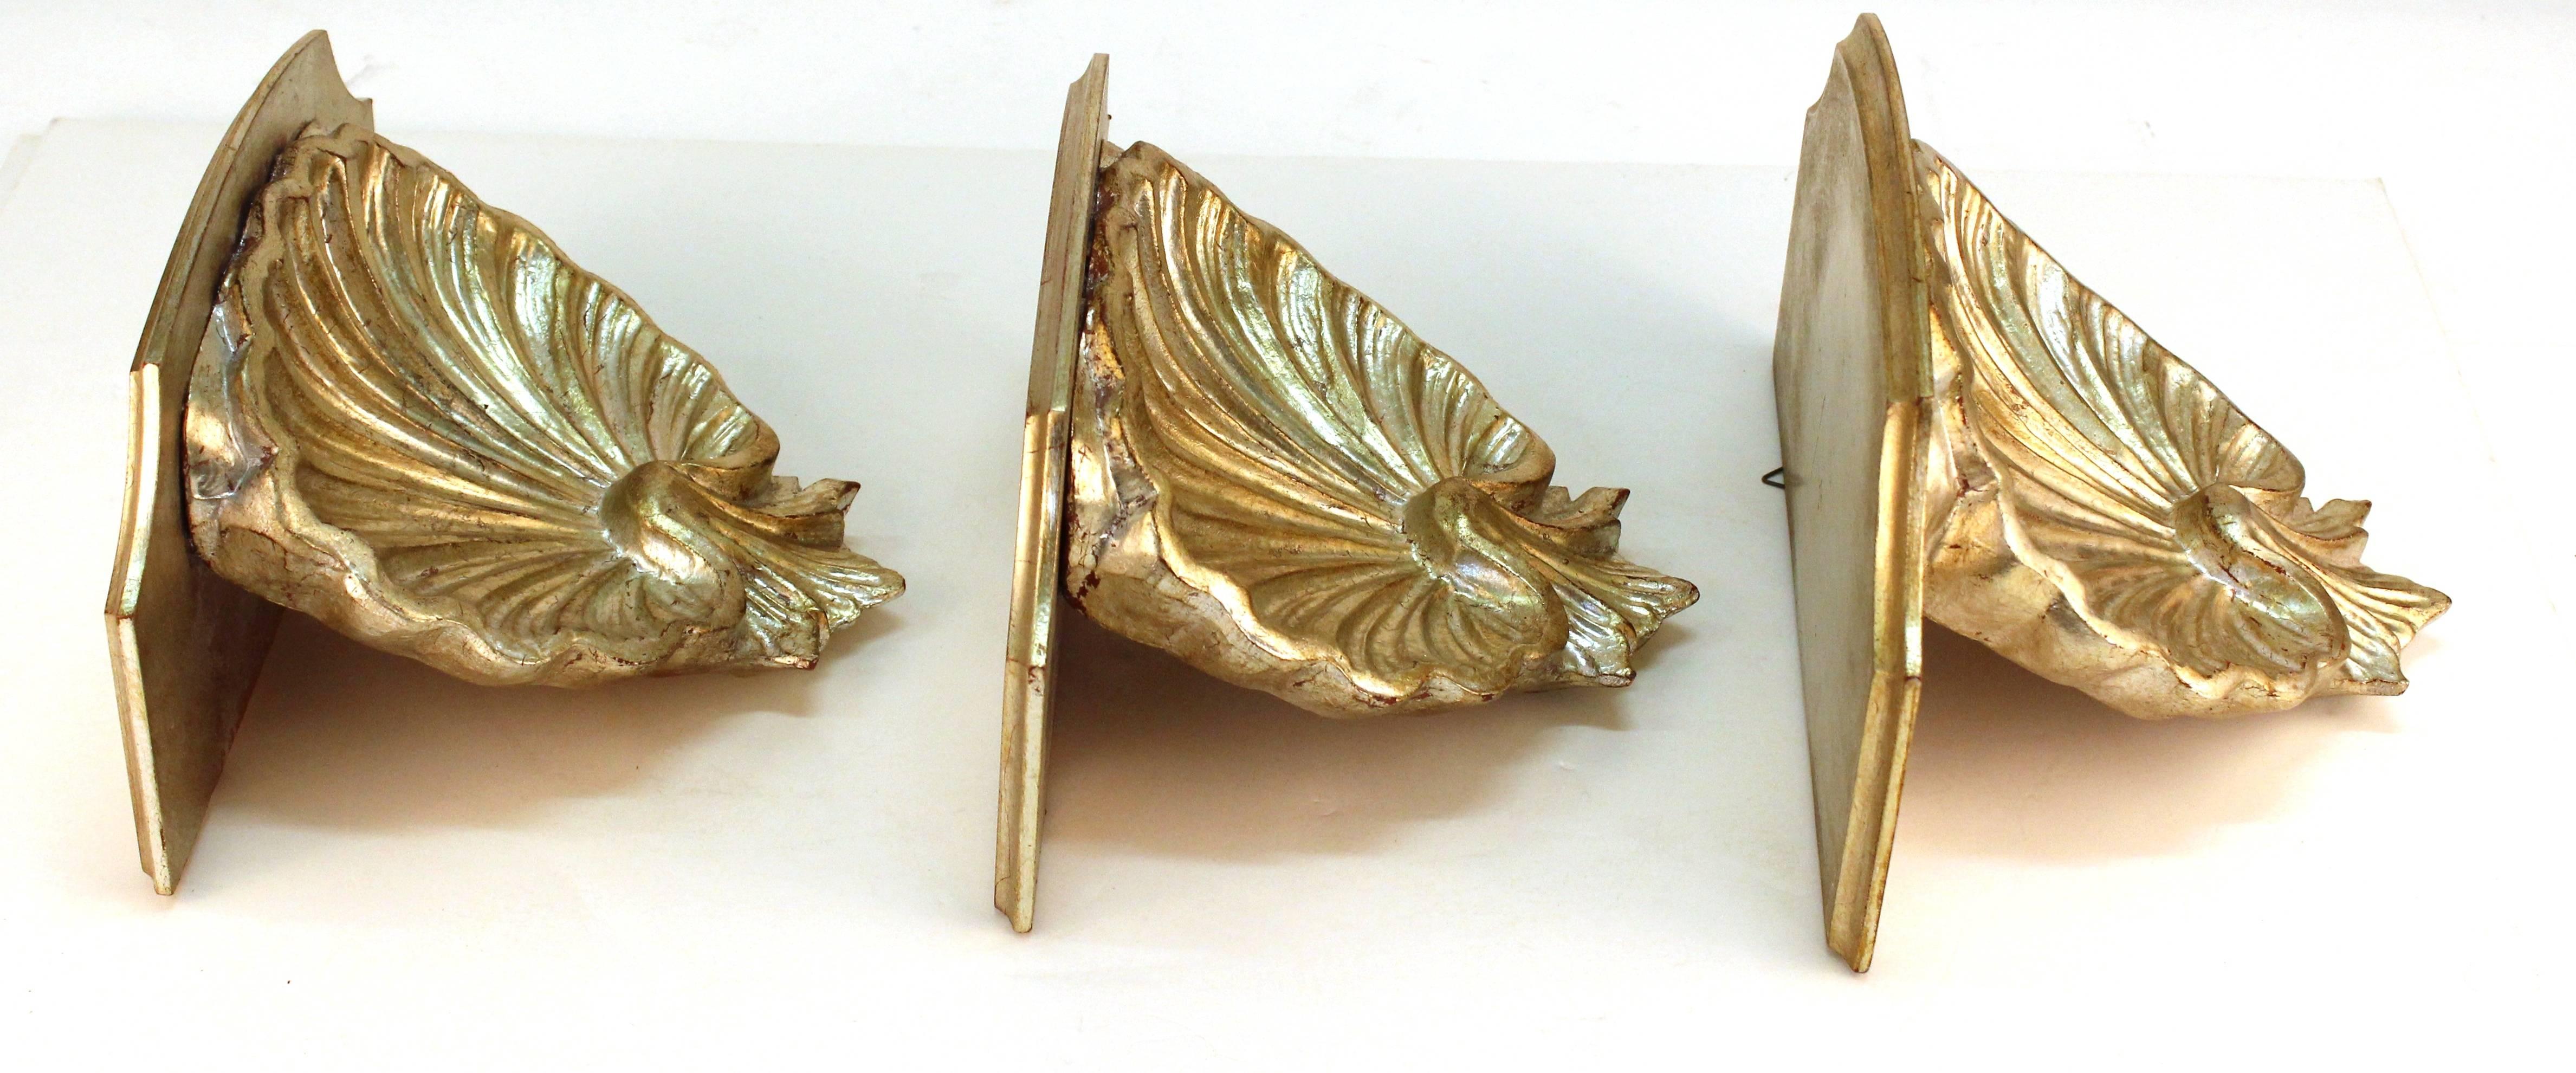 Shelf wall sconces with shell shapes in wood, painted silver. Each of these three wall sconces features a flat shelf on the top and scalloped shell form underneath. Each of these shelves is in good vintage condition and has wear consistent with age